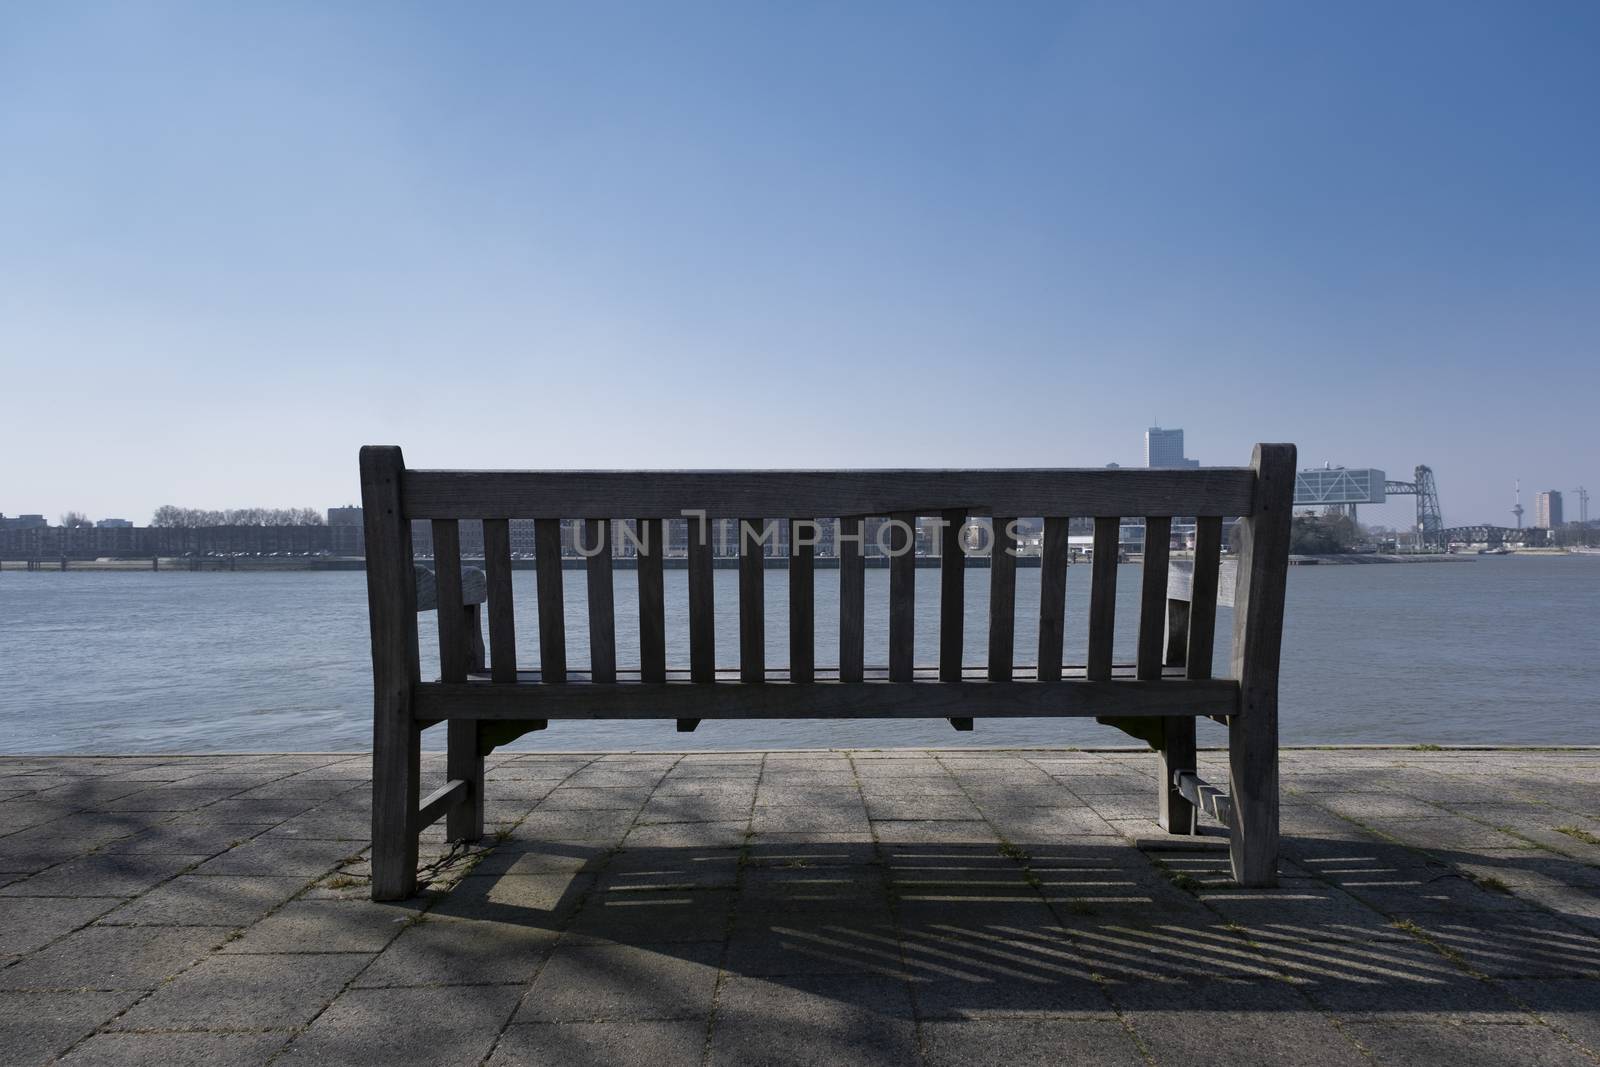 Bench seat in the city of rotterdam with river view